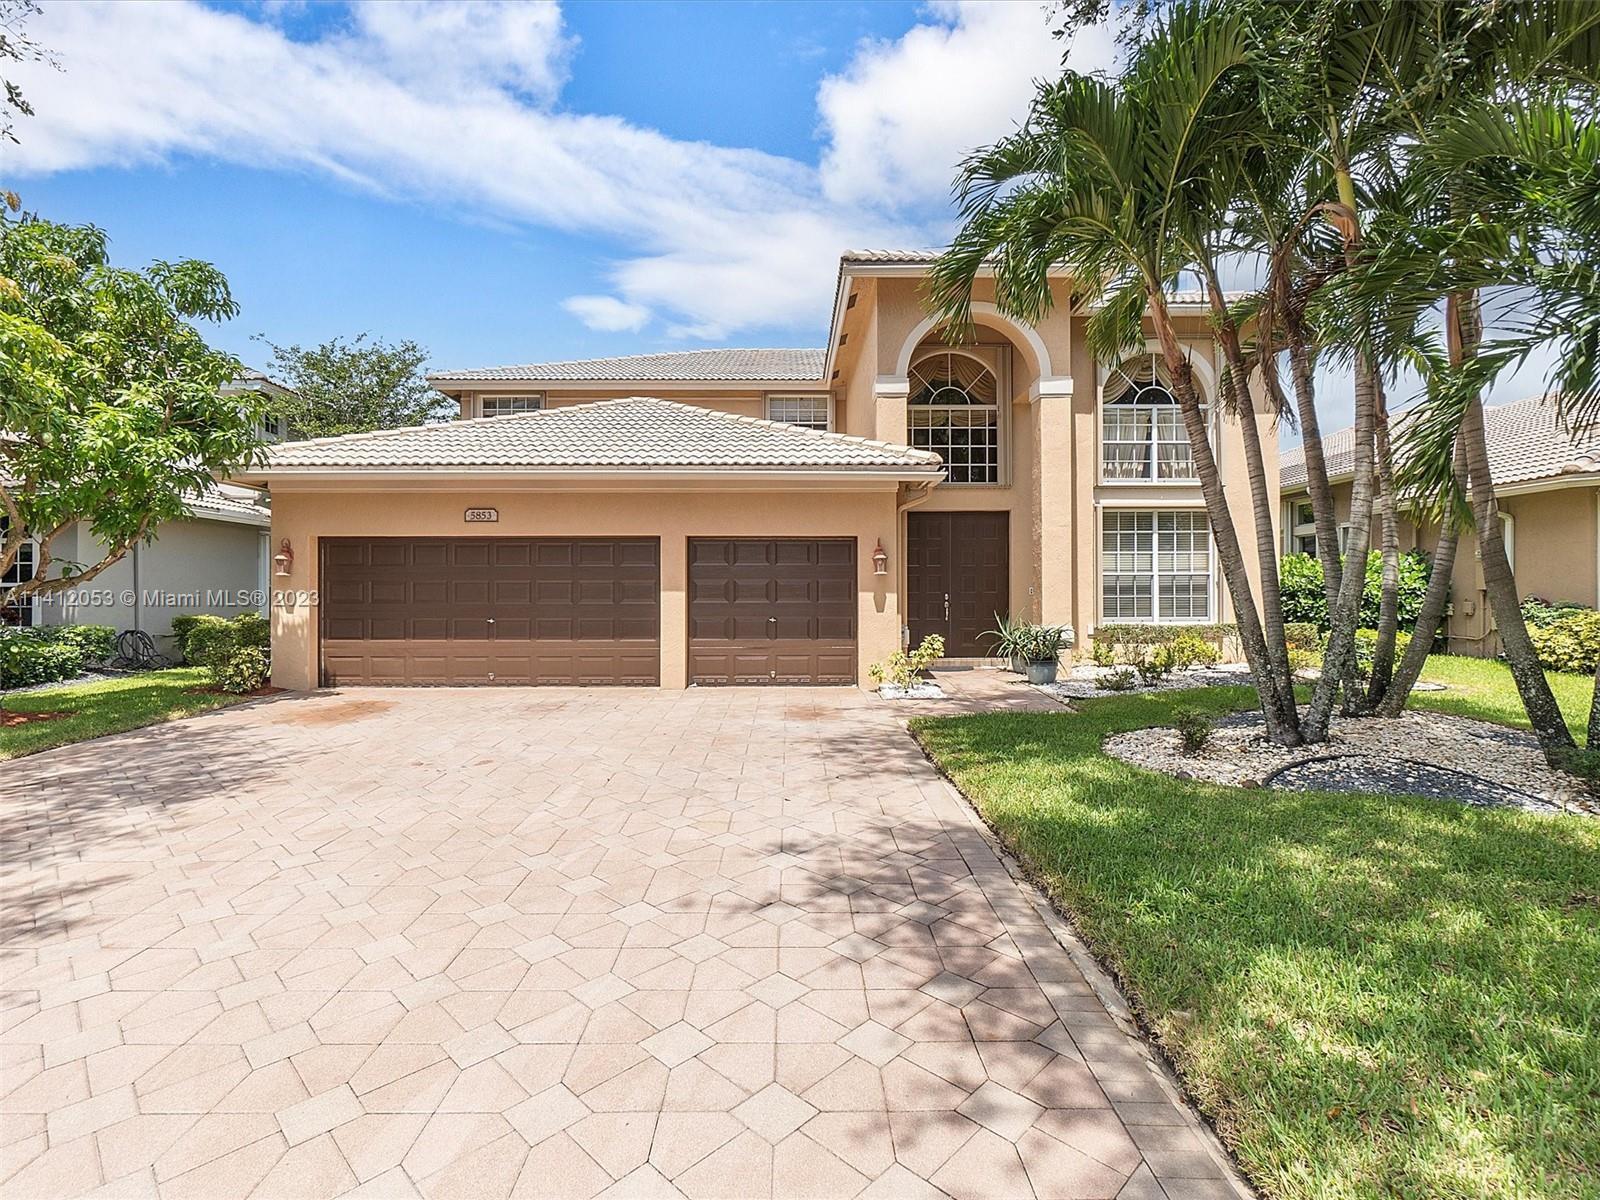 Photo of 5853 NW 54th Cir in Coral Springs, FL